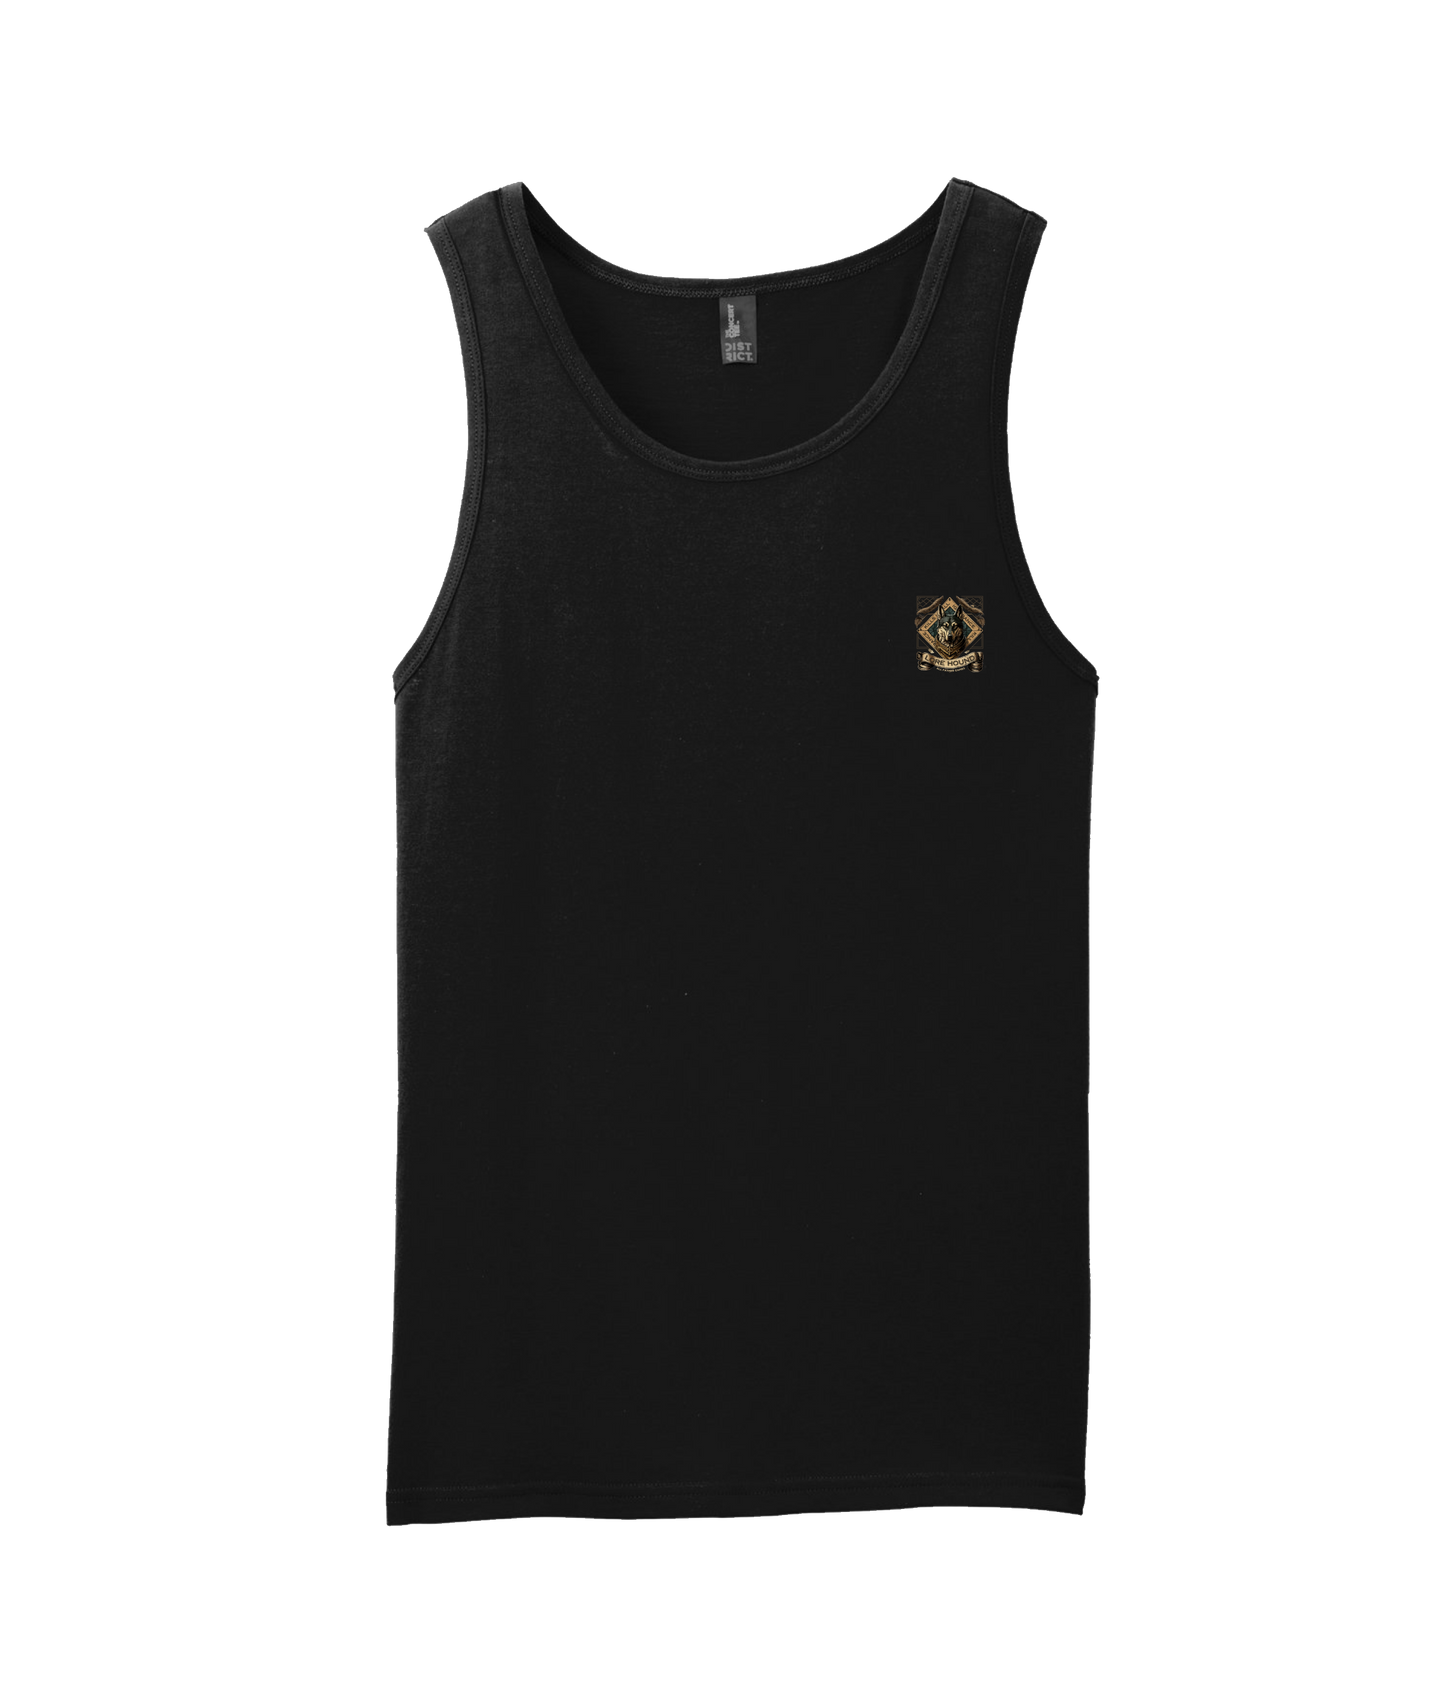 All Father Games - LORE HOUND - Black Tank Top